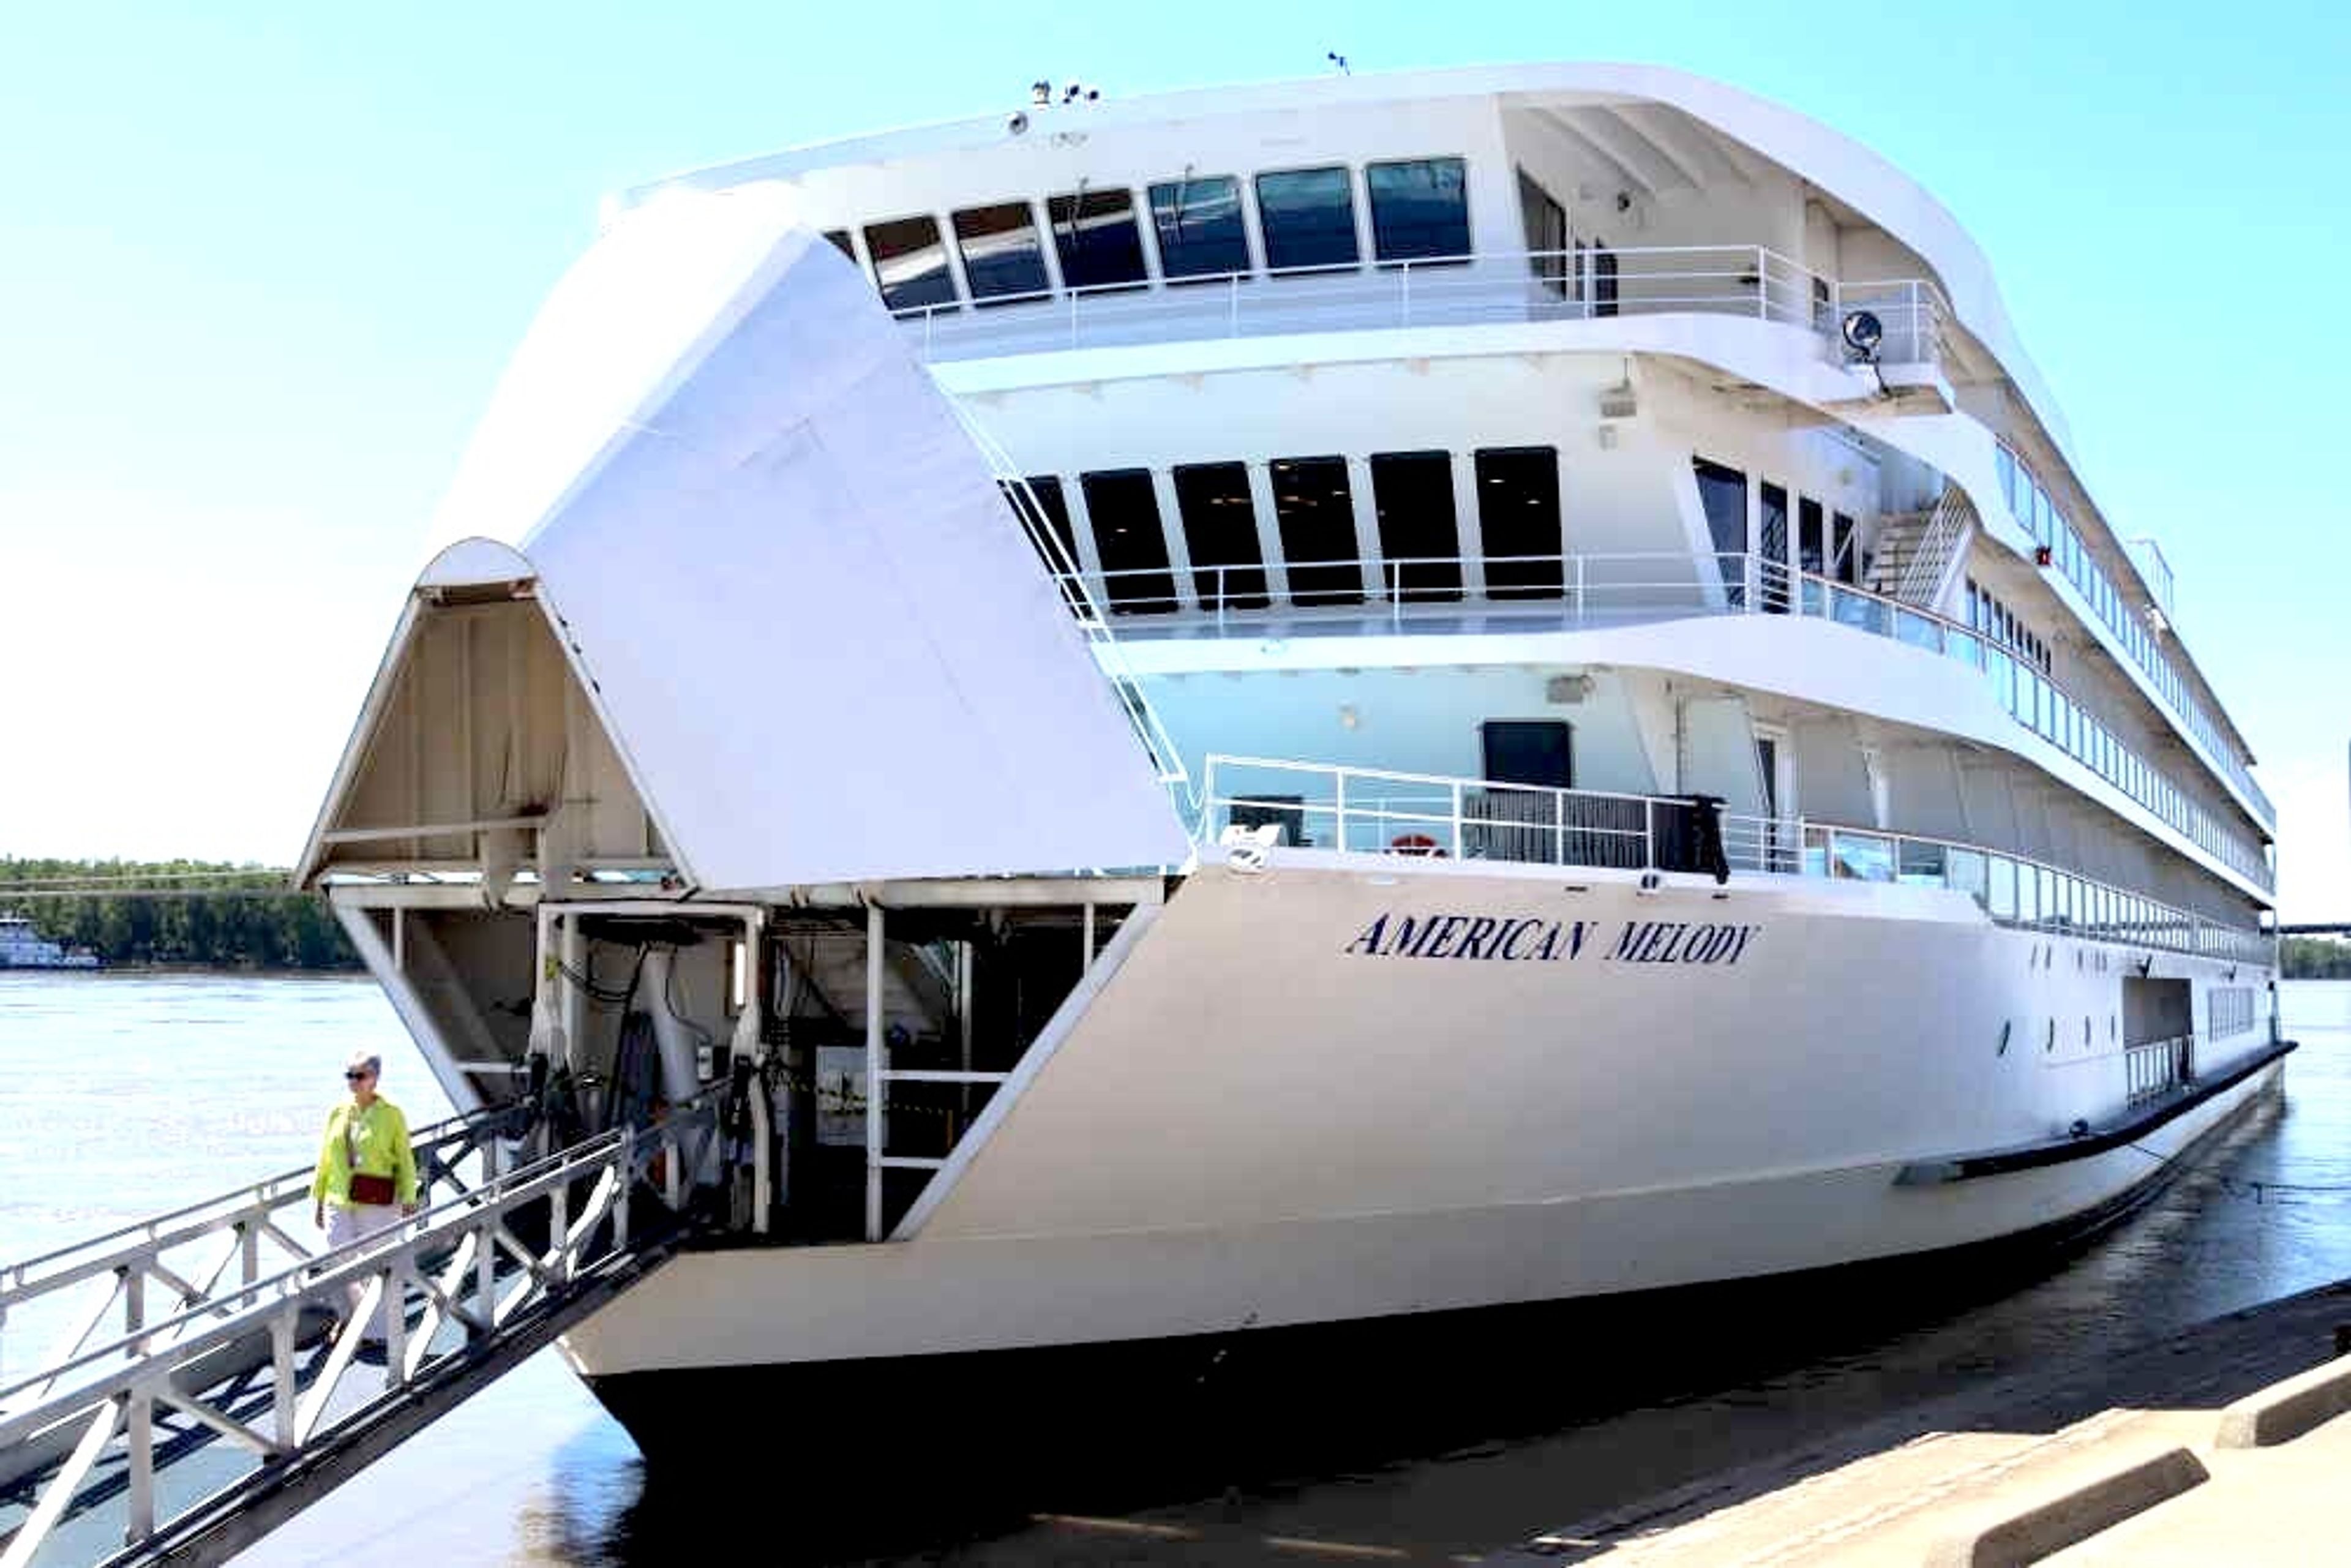 
A passenger of the American Melody leaves the vessel June 11 to explore Cape Girardeau.
